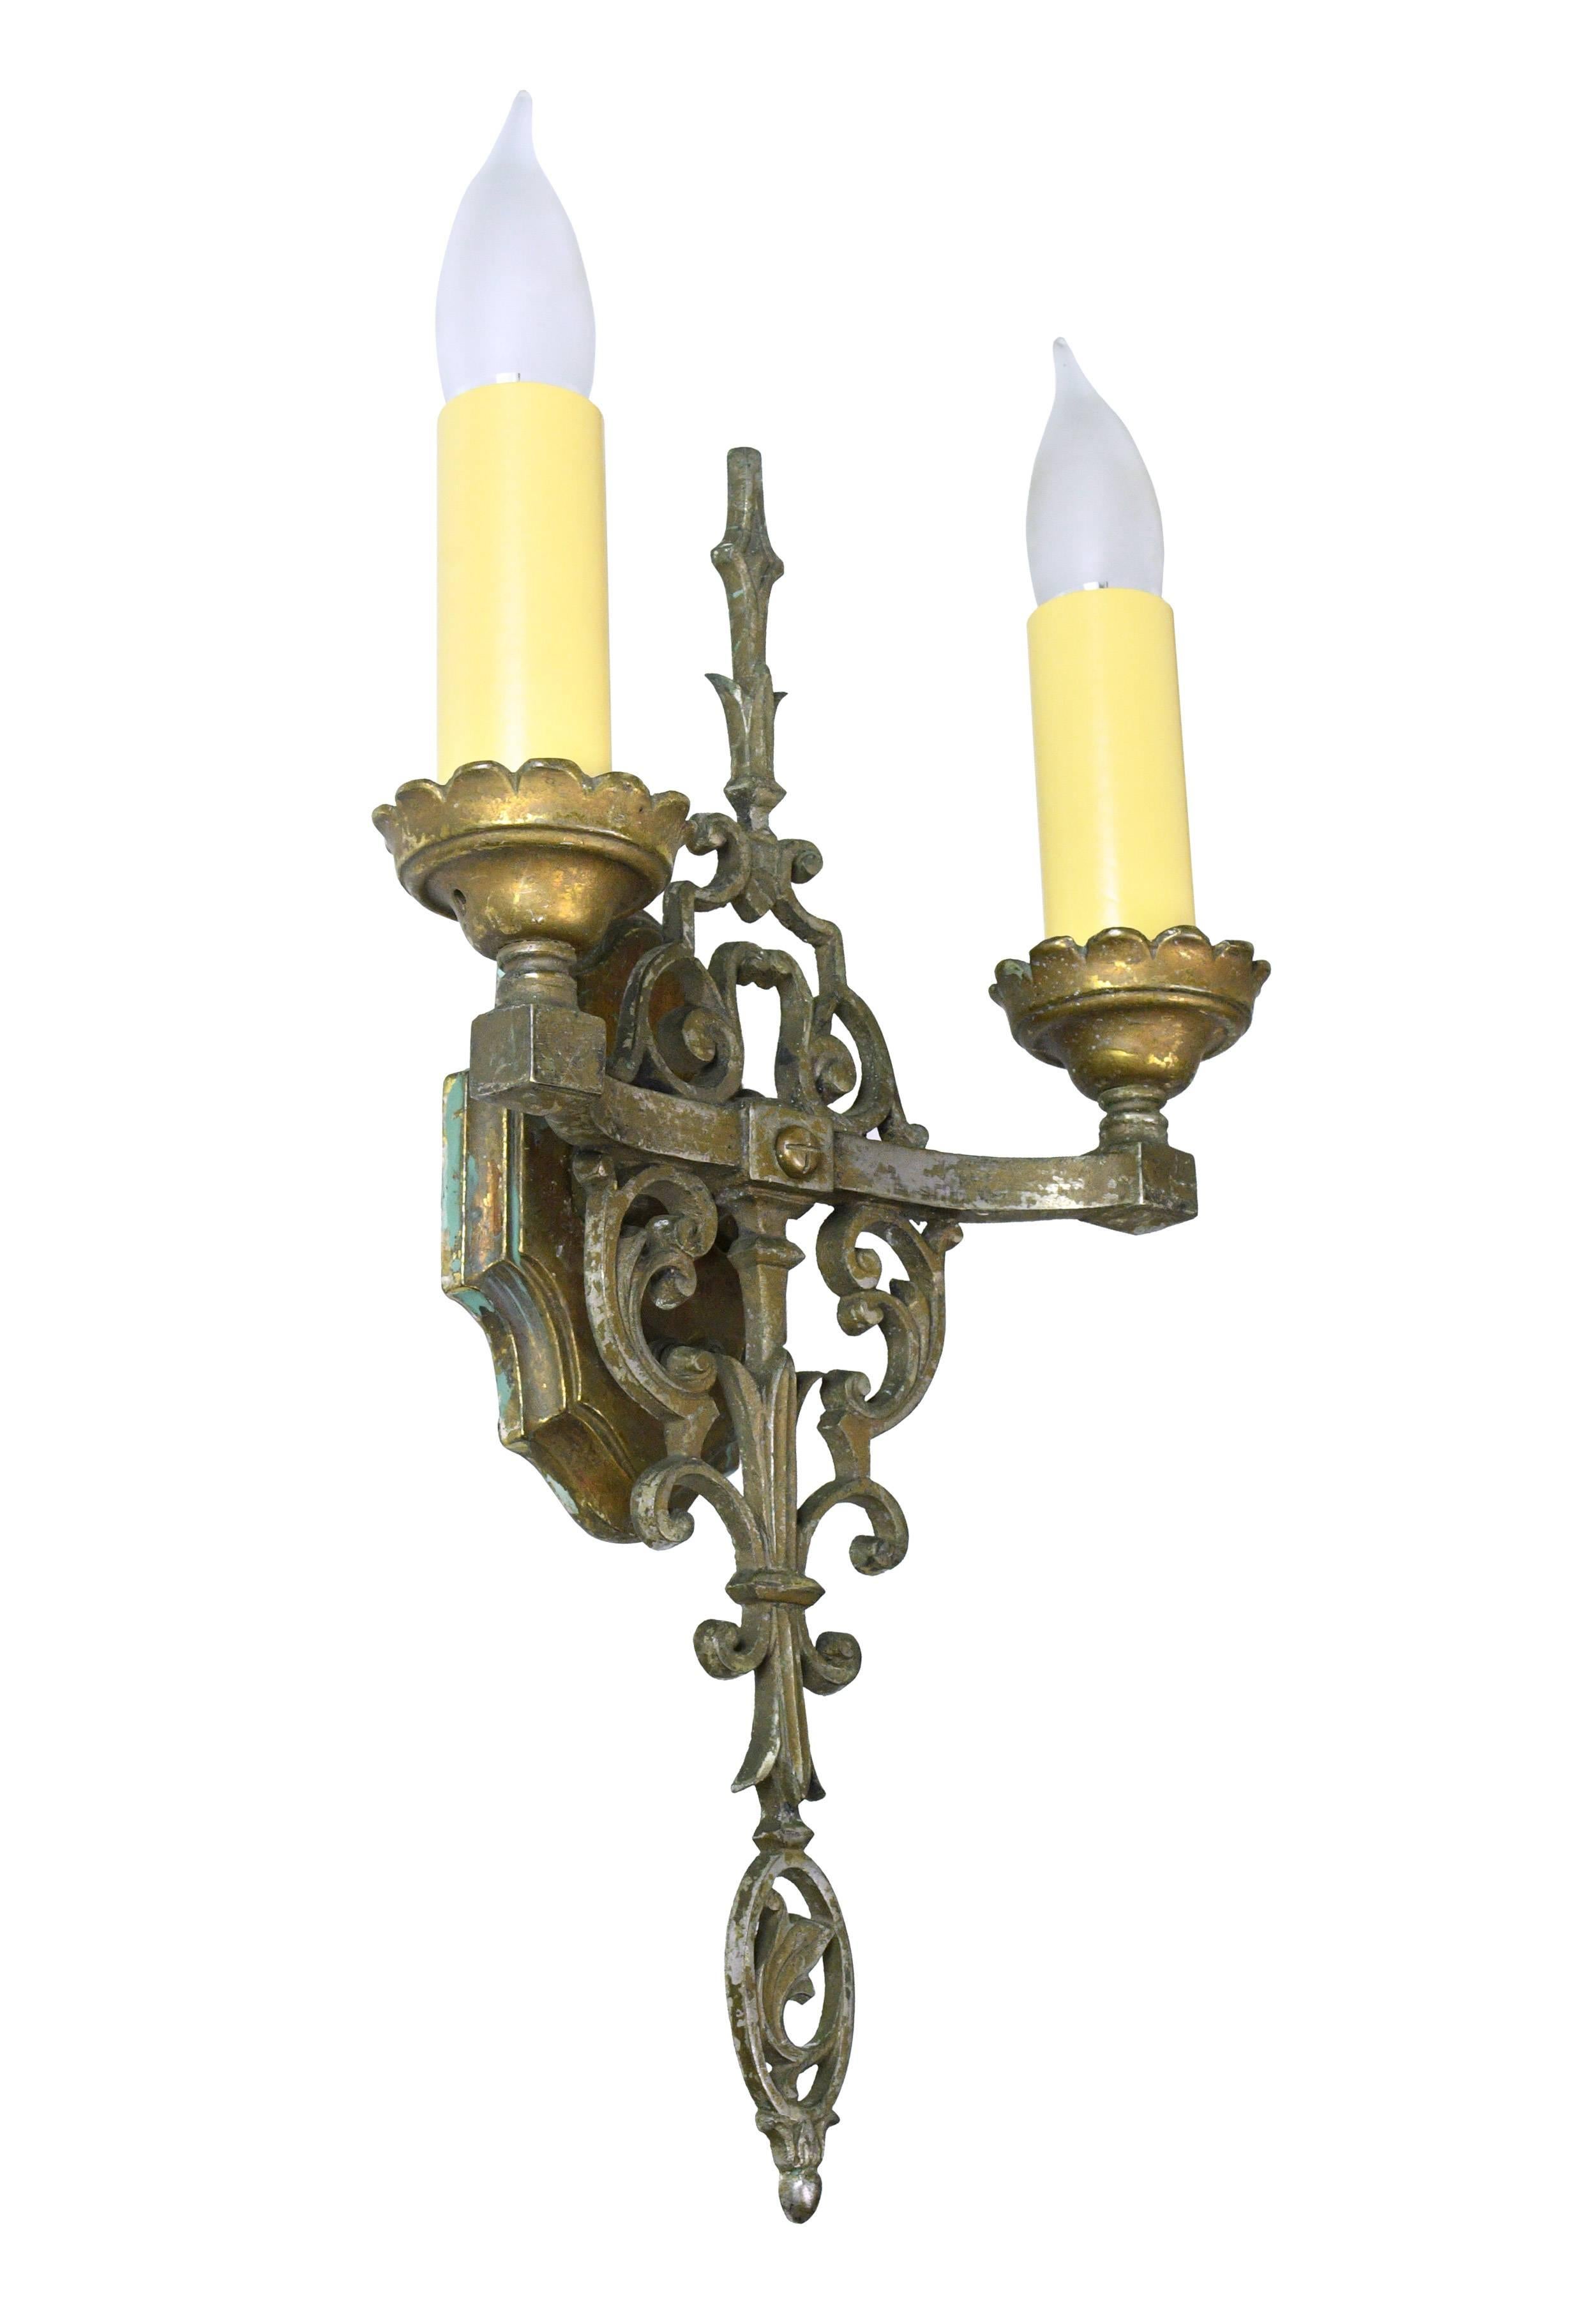 Elegant, tall cast brass Tudor sconce with delicate swirling motifs throughout. This fixture exudes an understated grace that will perfectly compliment any number of design styles, 

circa 1910
Condition: Excellent
Finish: Original
Country of